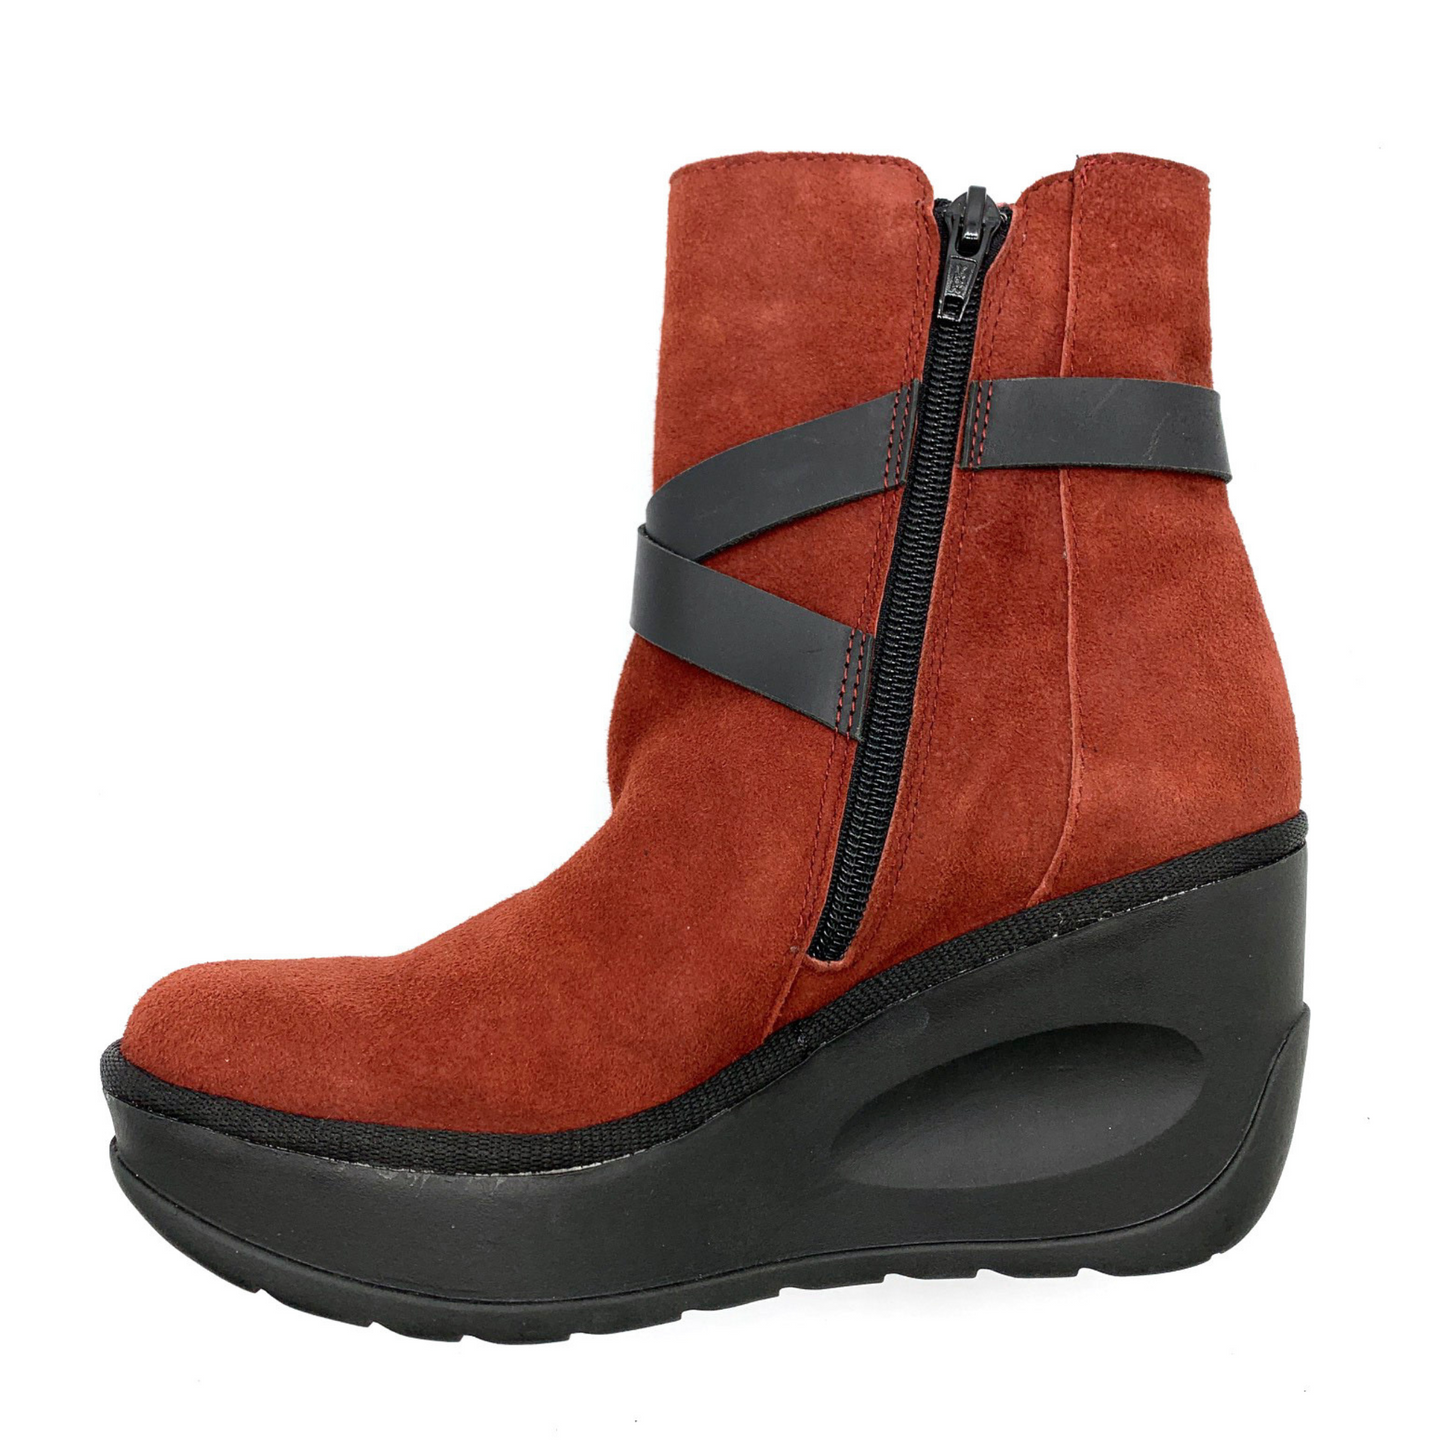 A left side view of a soft, red leather boot with a wedged black rubber sole, a black zipper up the side, and crossing black leather straps around the front.